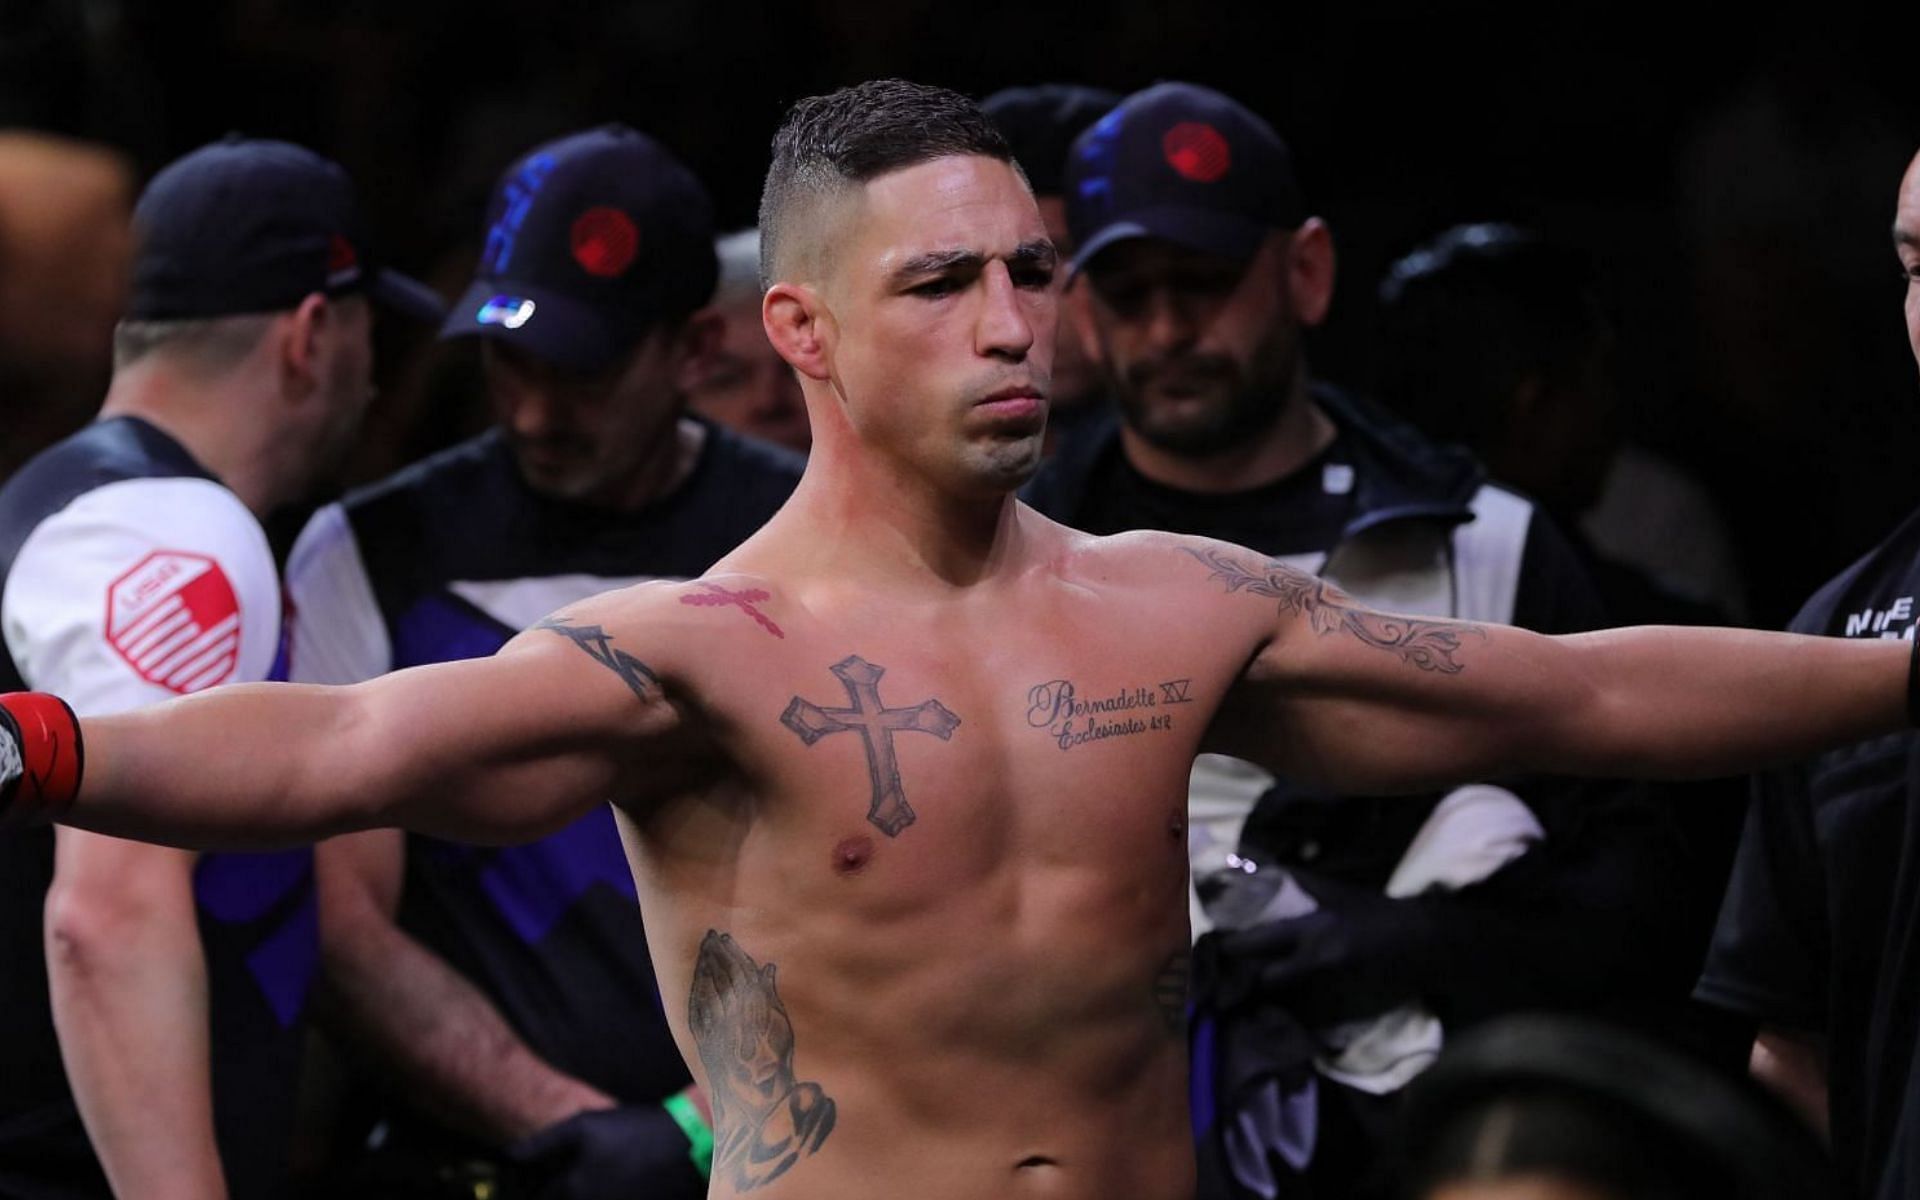 Diego Sanchez says he believes he saw a UFO over Albuquerque